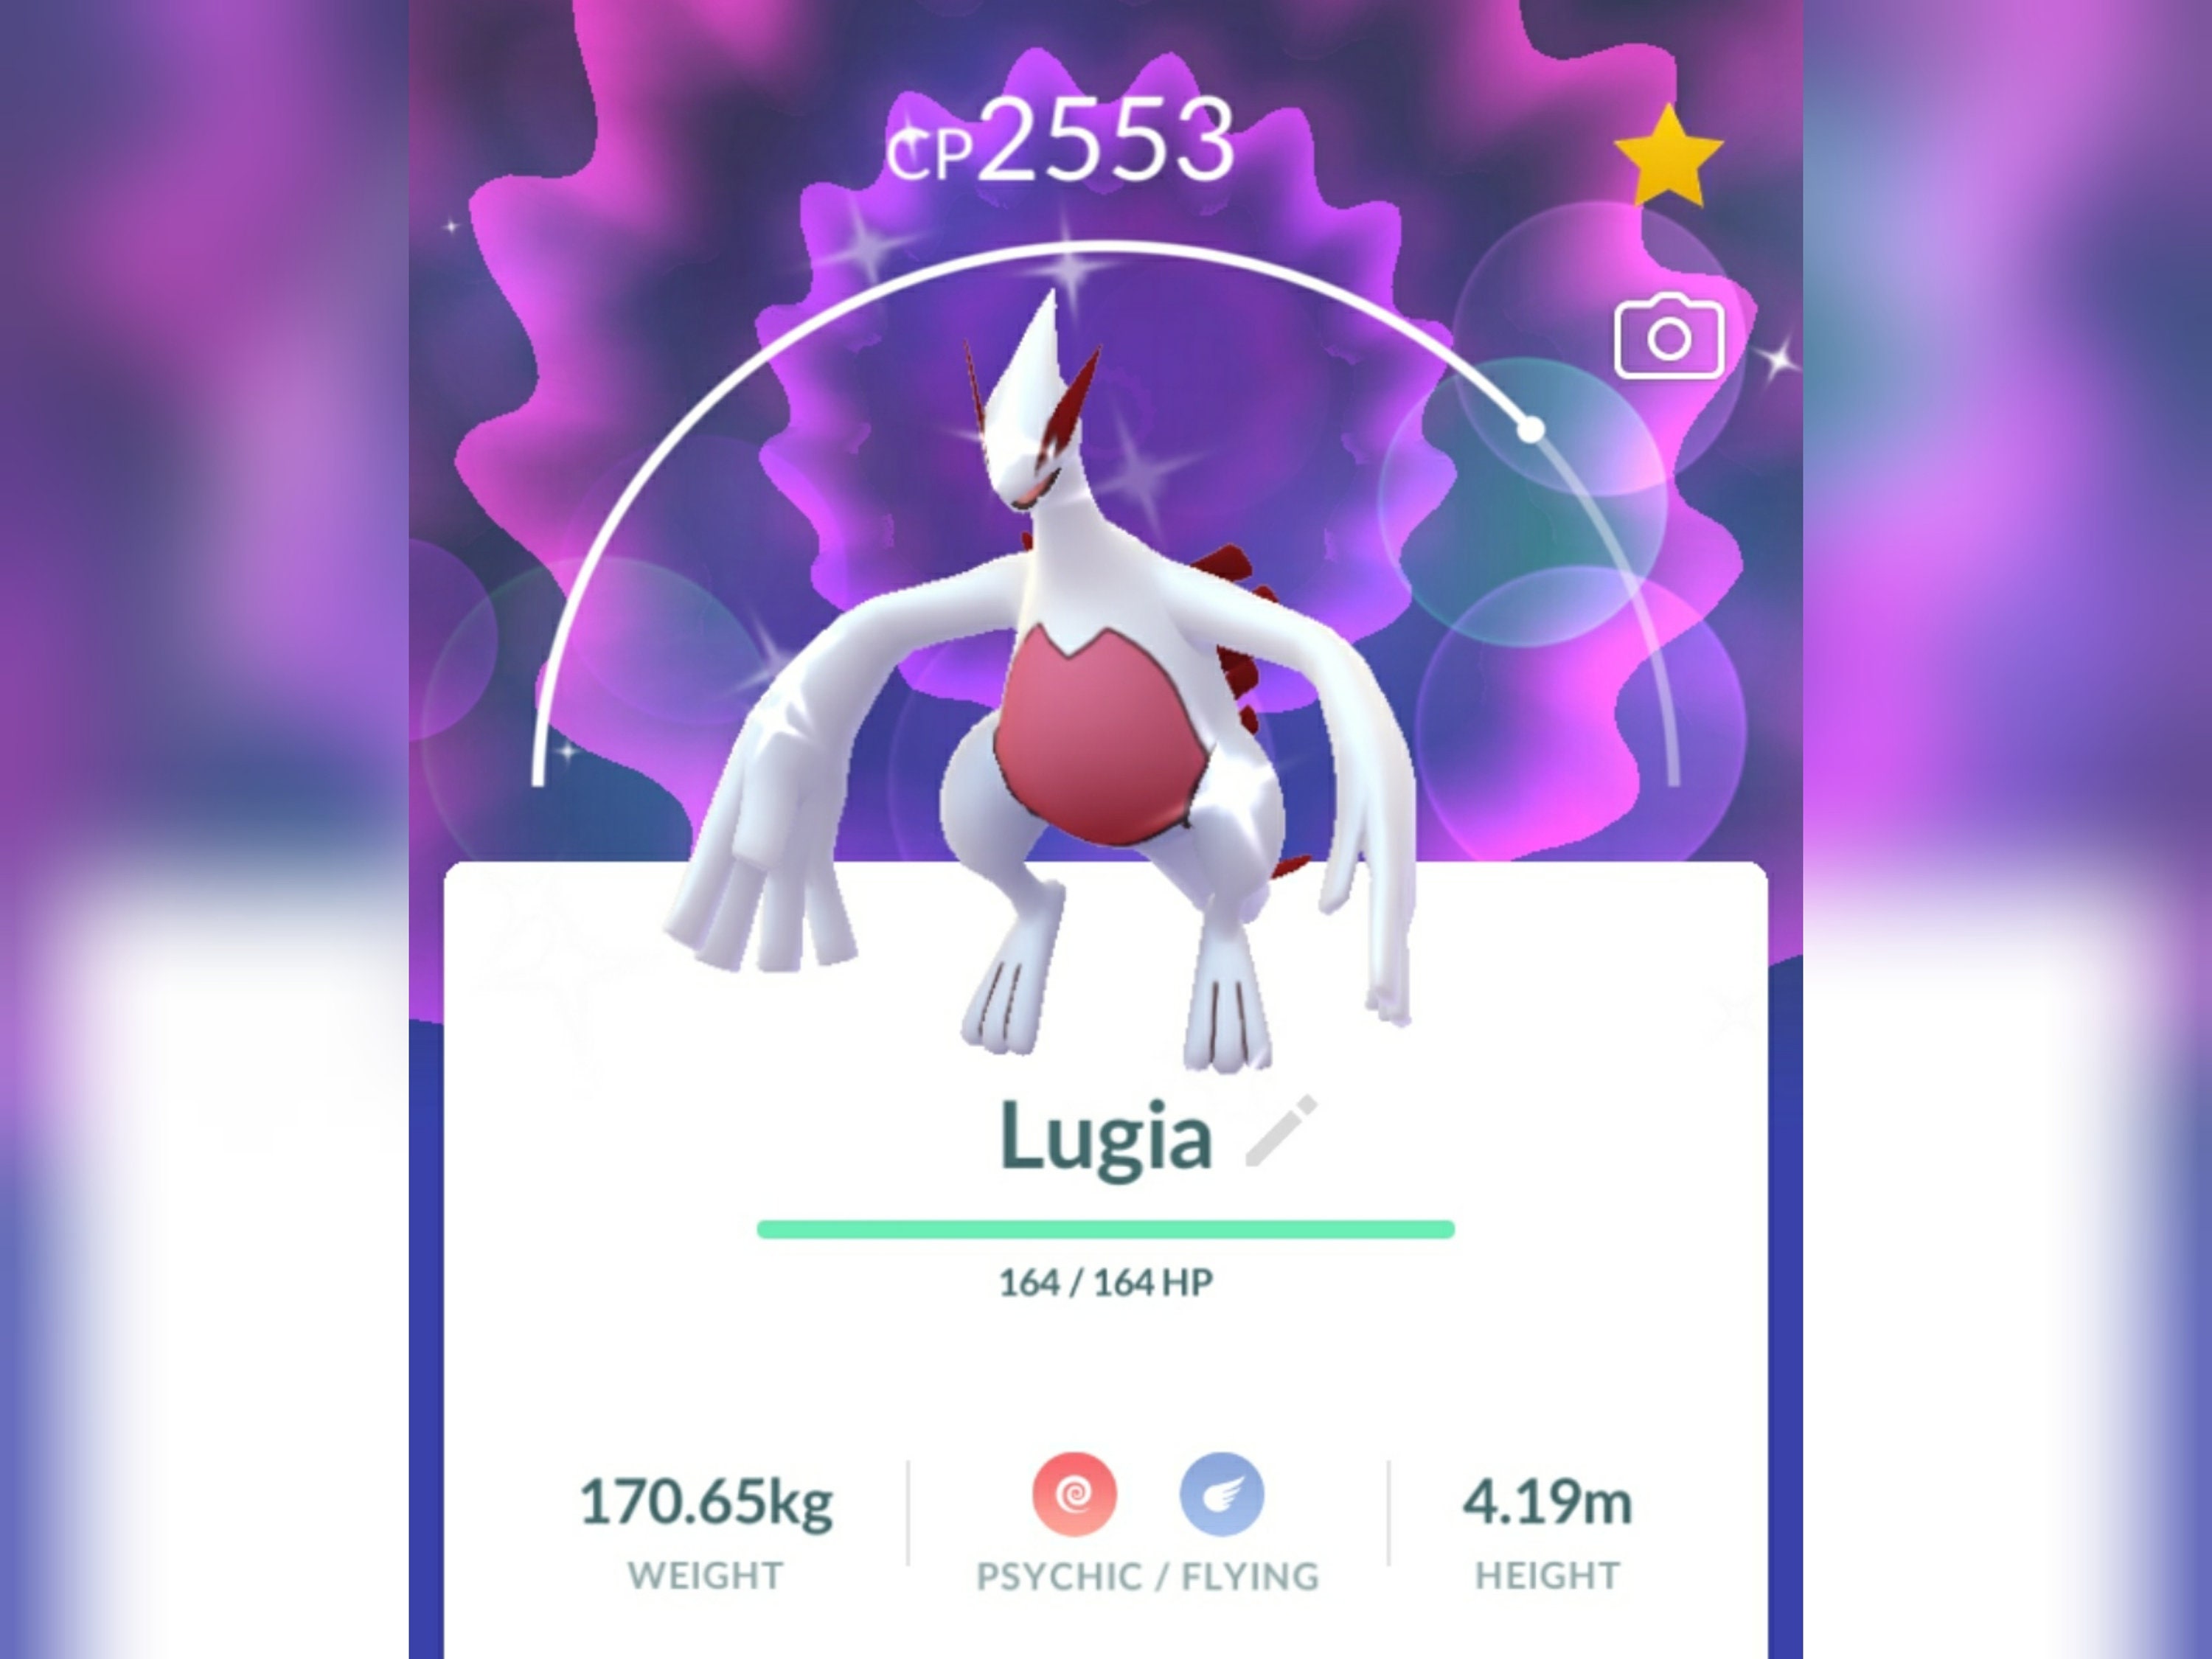 What will be my Mewtwo's CP once I purify him? : r/pokemongo